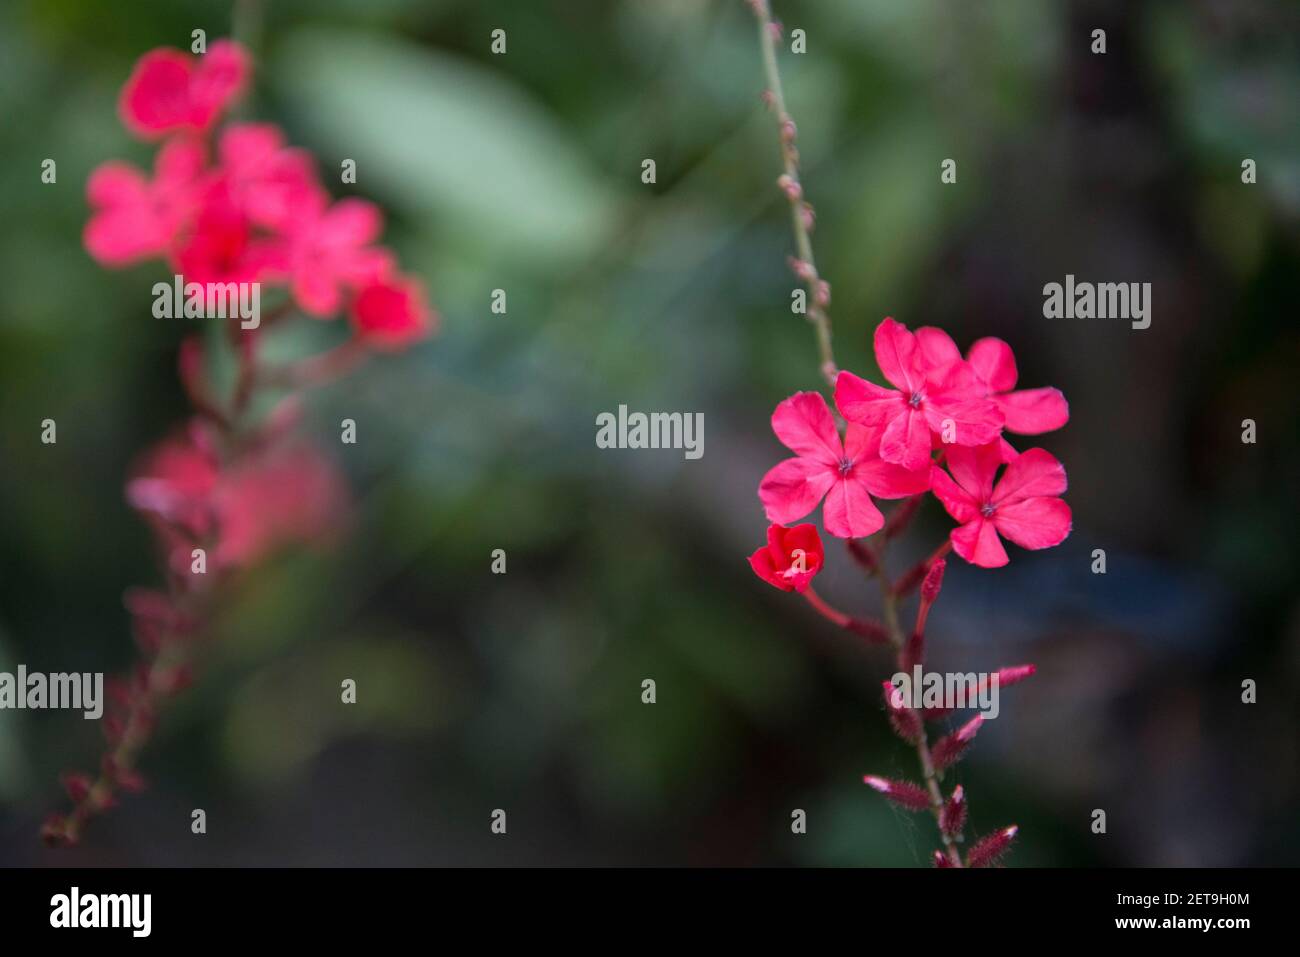 Bangladesh is a land of different types of flowers and tree. Stock Photo